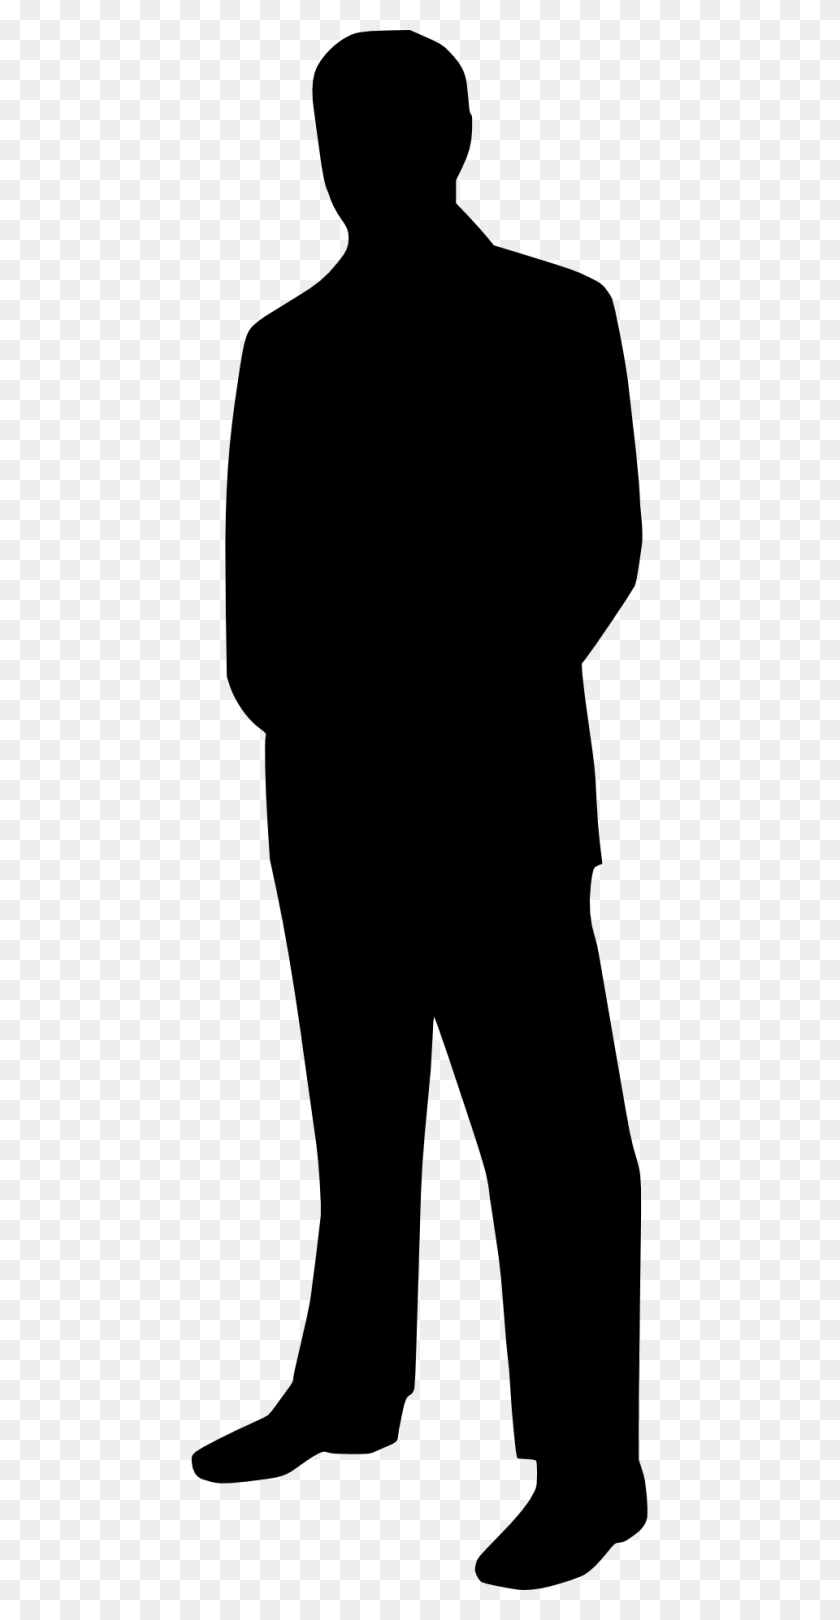 Business Man Tie Suit Black White Silhouette Free Image - Man In A Suit ...